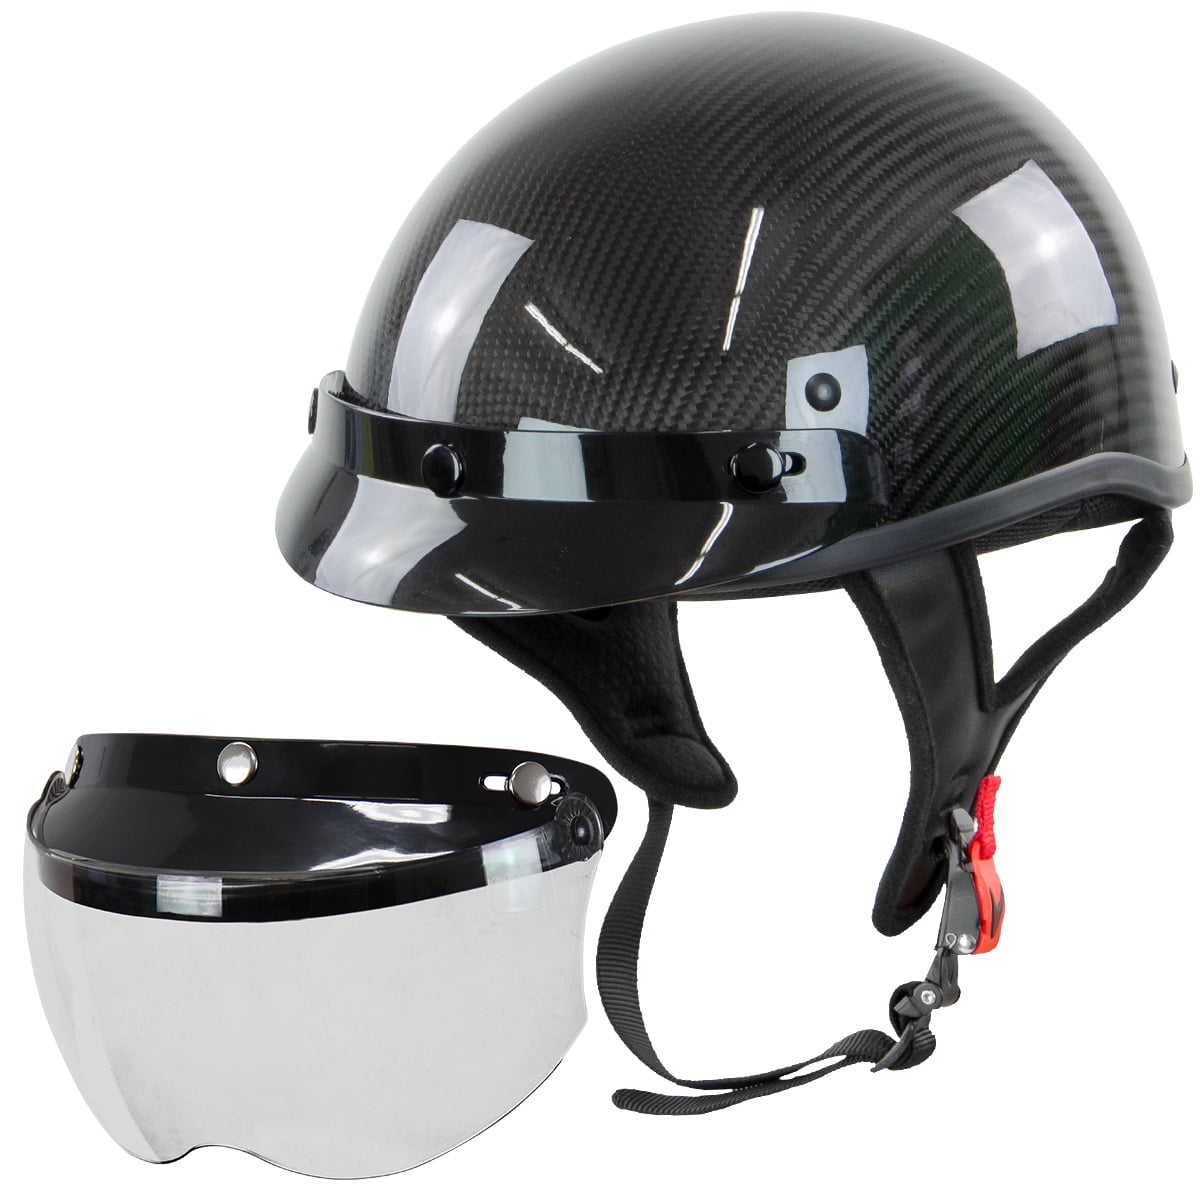 Outlaw T71-Carbon Glossy Carbon-Fiber Ultra-Light Motorcycle Helmet With Clear - Walmart.com